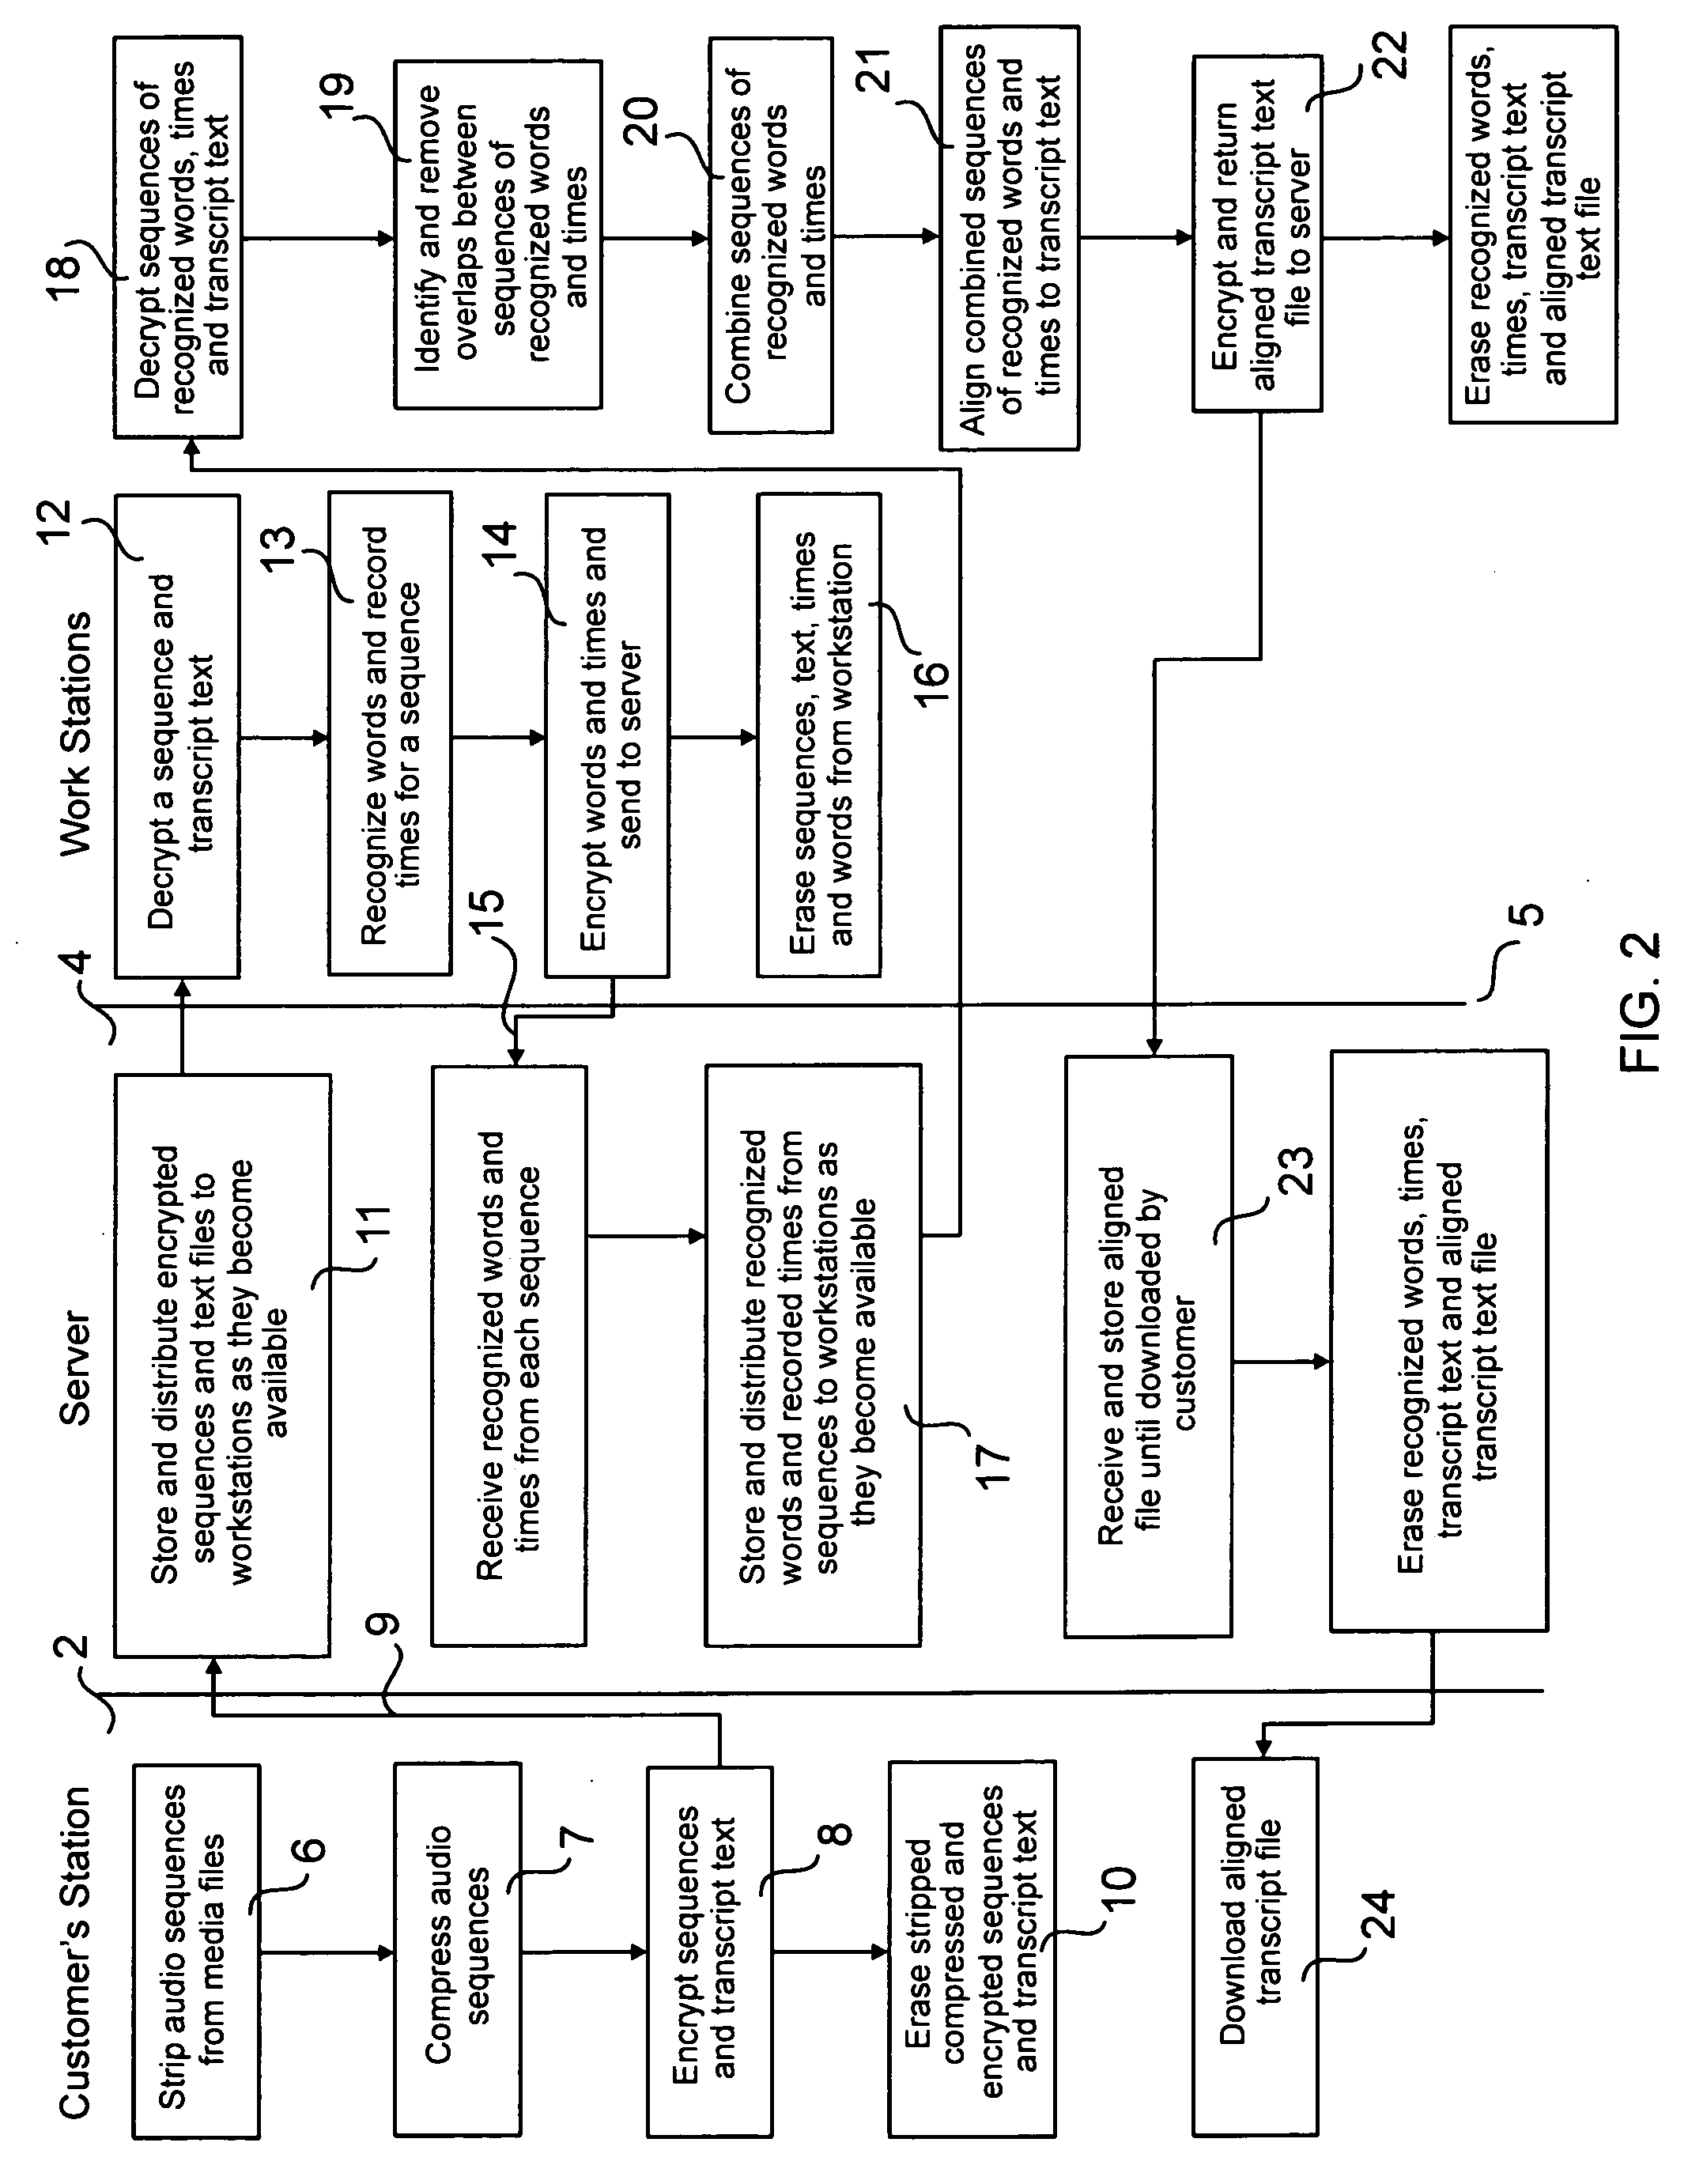 Method for electronically generating a synchronized textual transcript of an audio recording